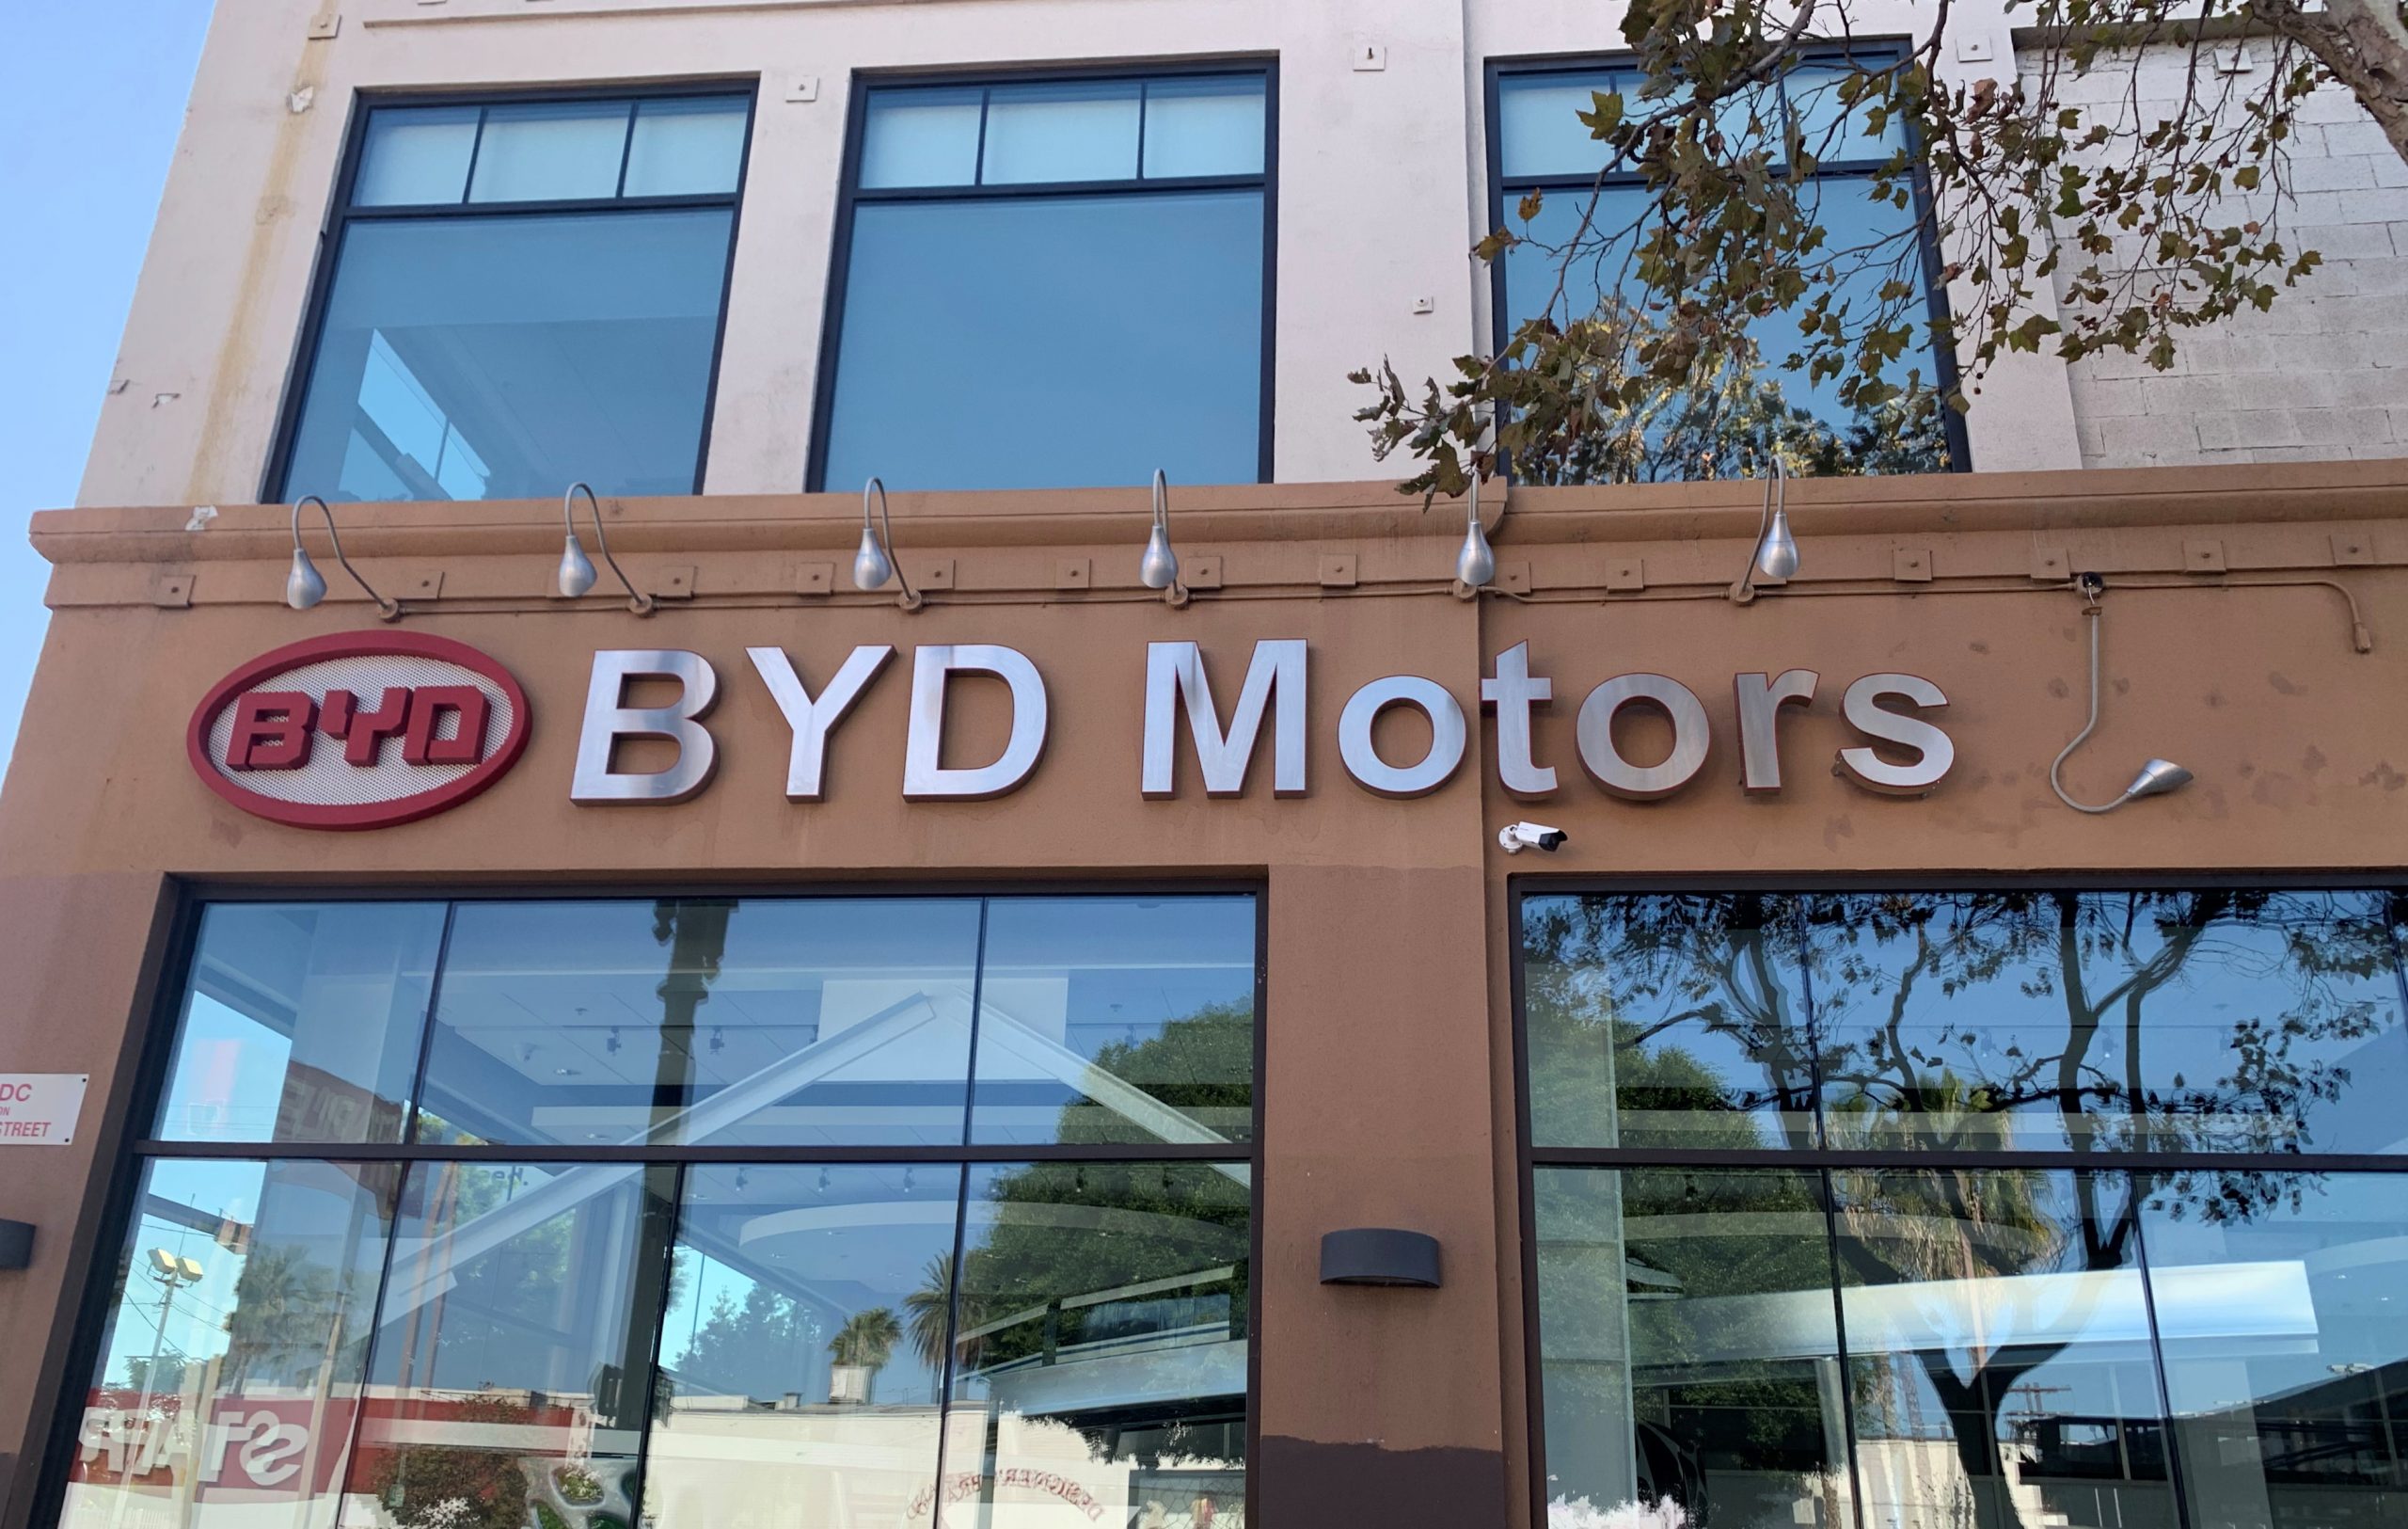 You are currently viewing Steel Dimensional Letters for BYD Motors Inc in Los Angeles